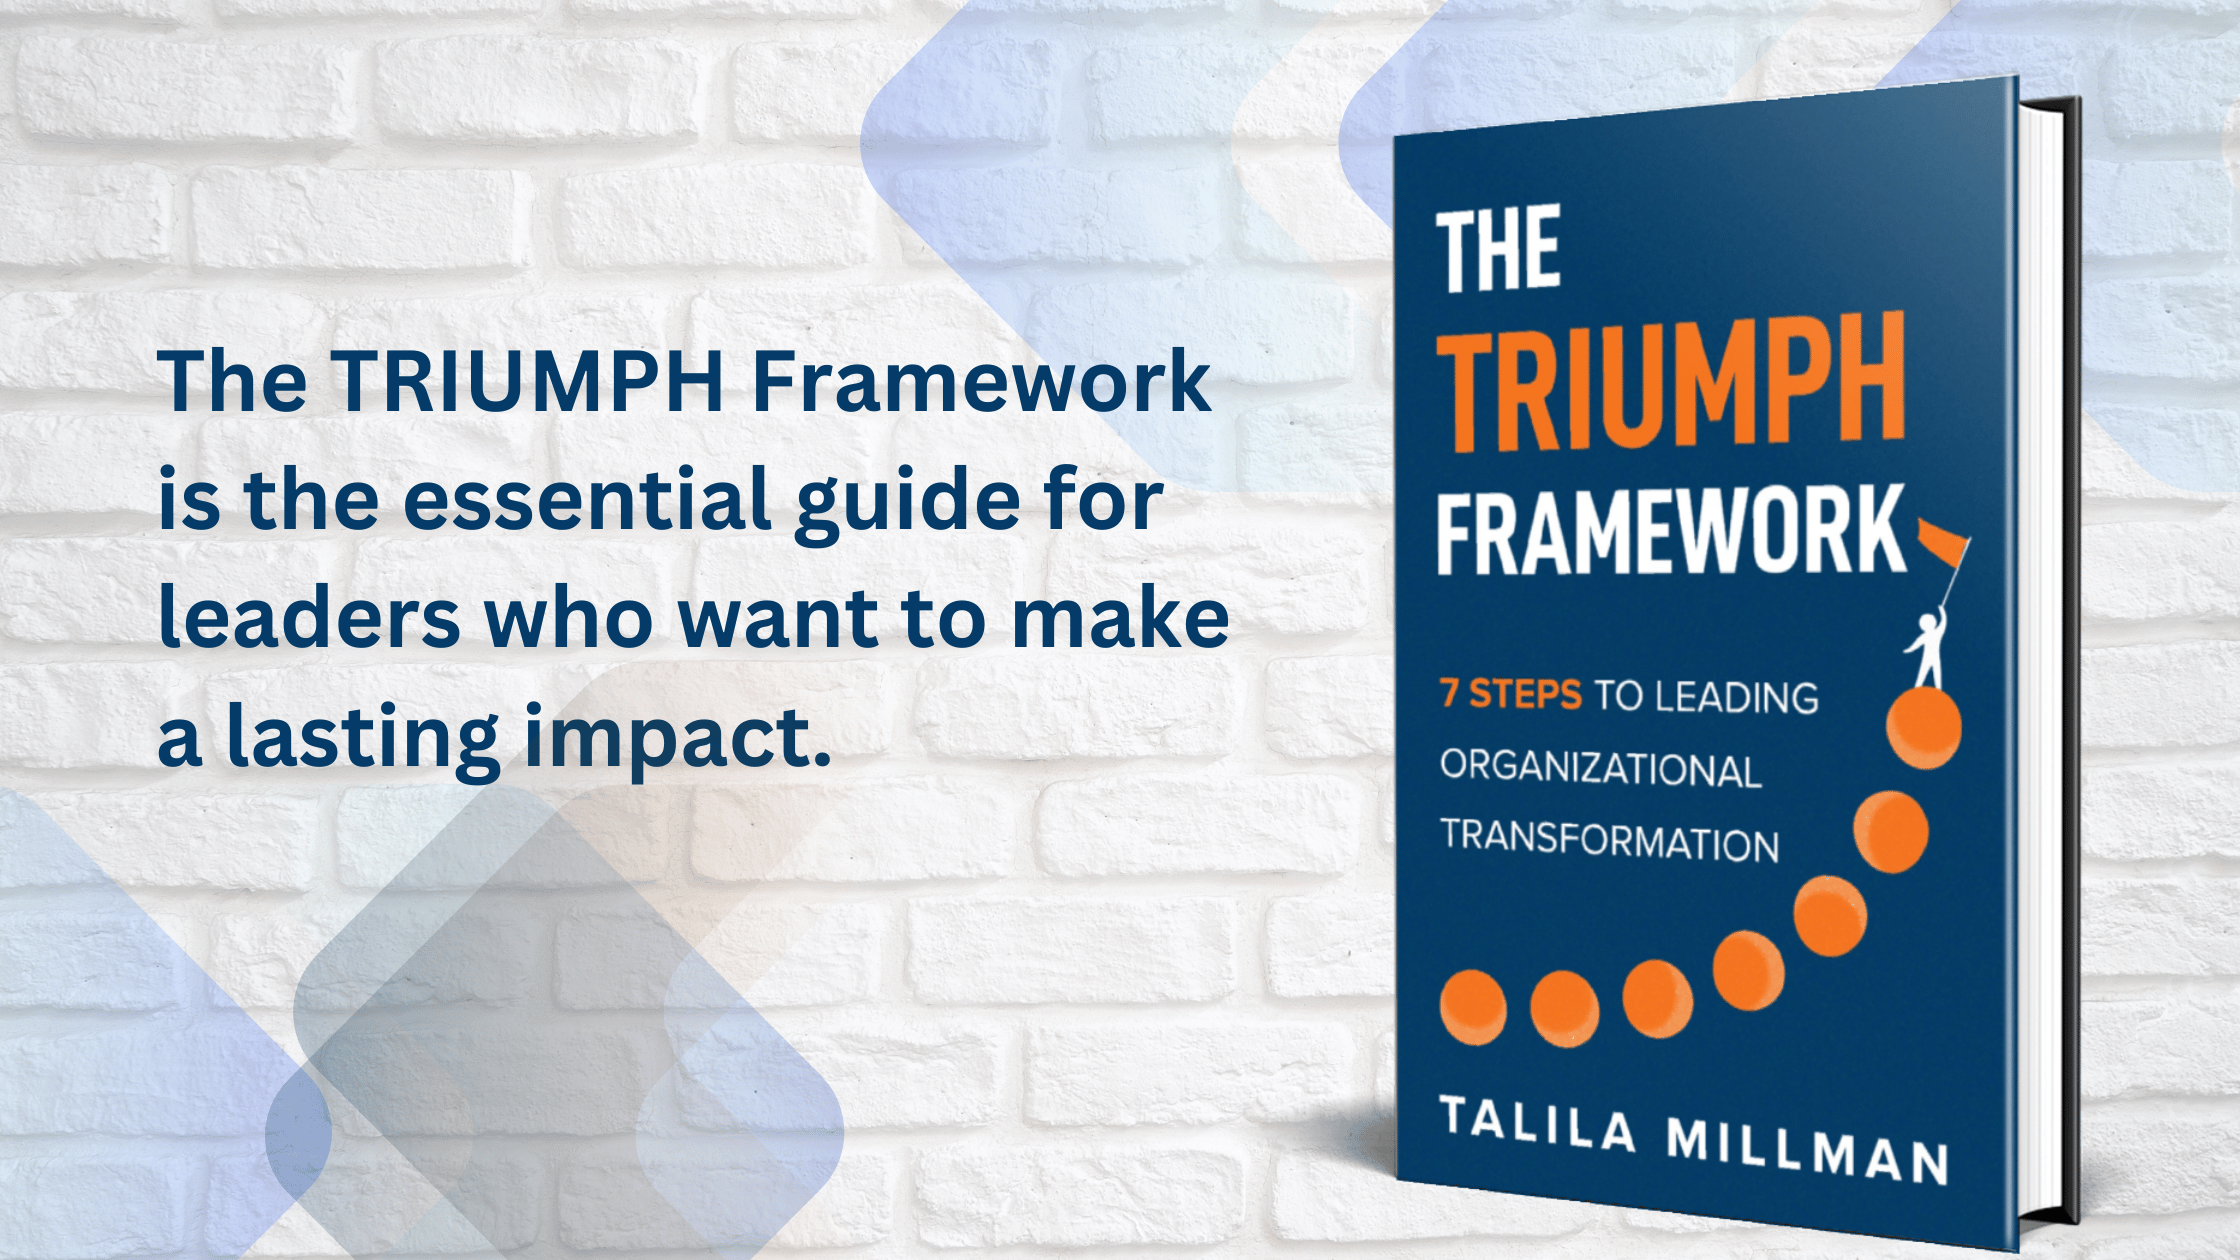 The TRIUMPH Framework is the essential guide for leaders who want to make a lasting impact.